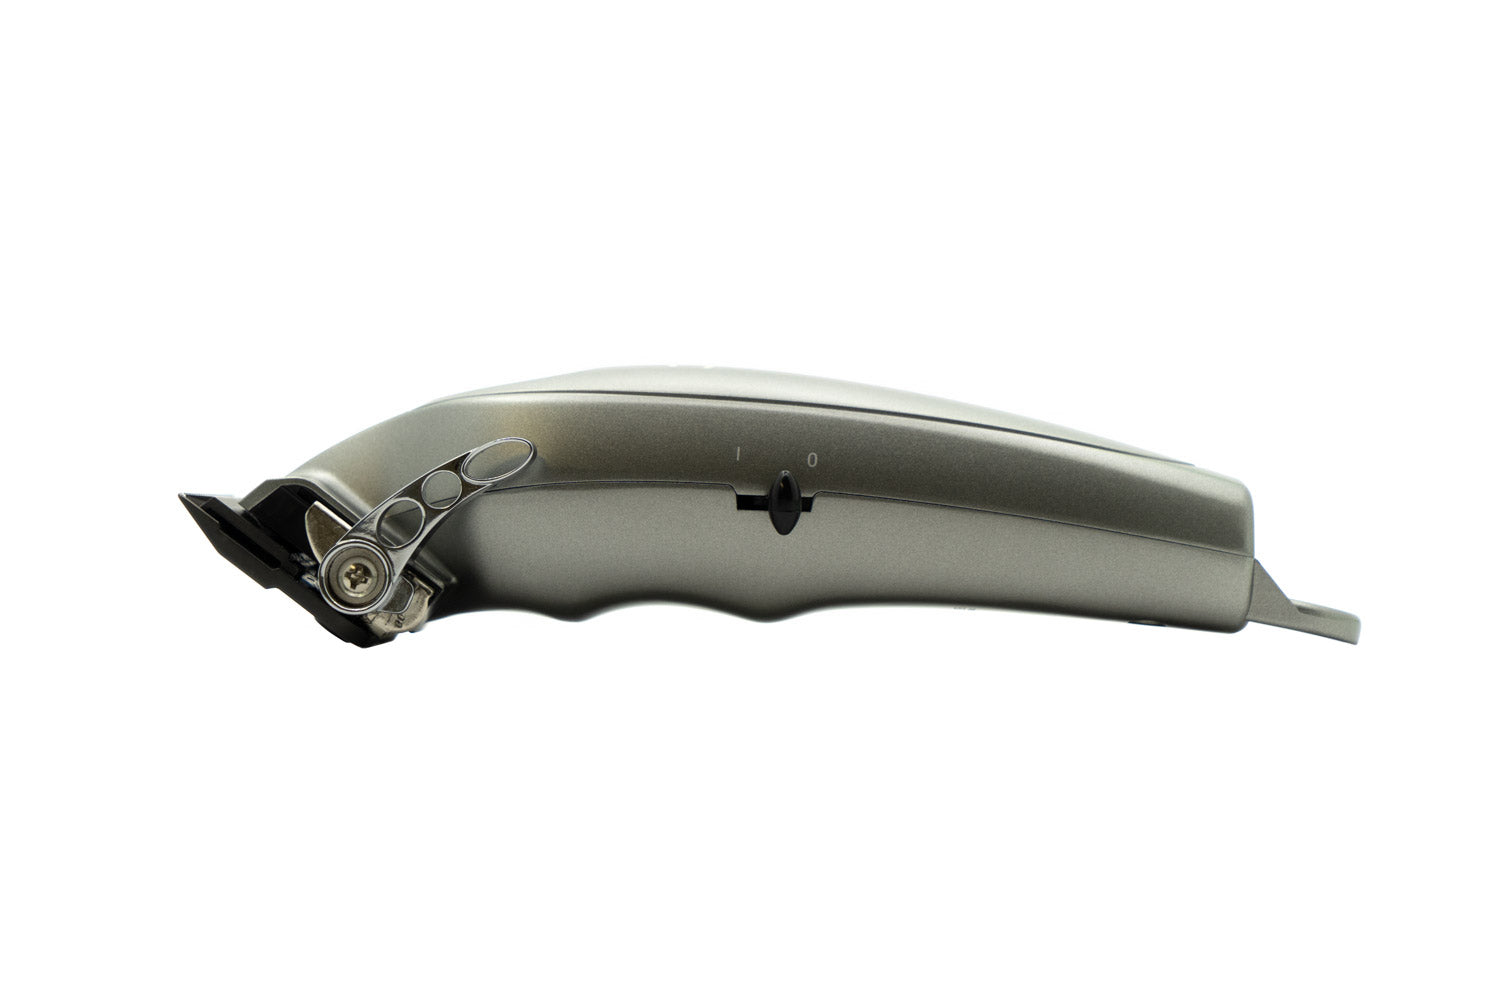 JC TRILOGY CLIPPER Silver - Cordless Rechargeable 2-3hr Runtime